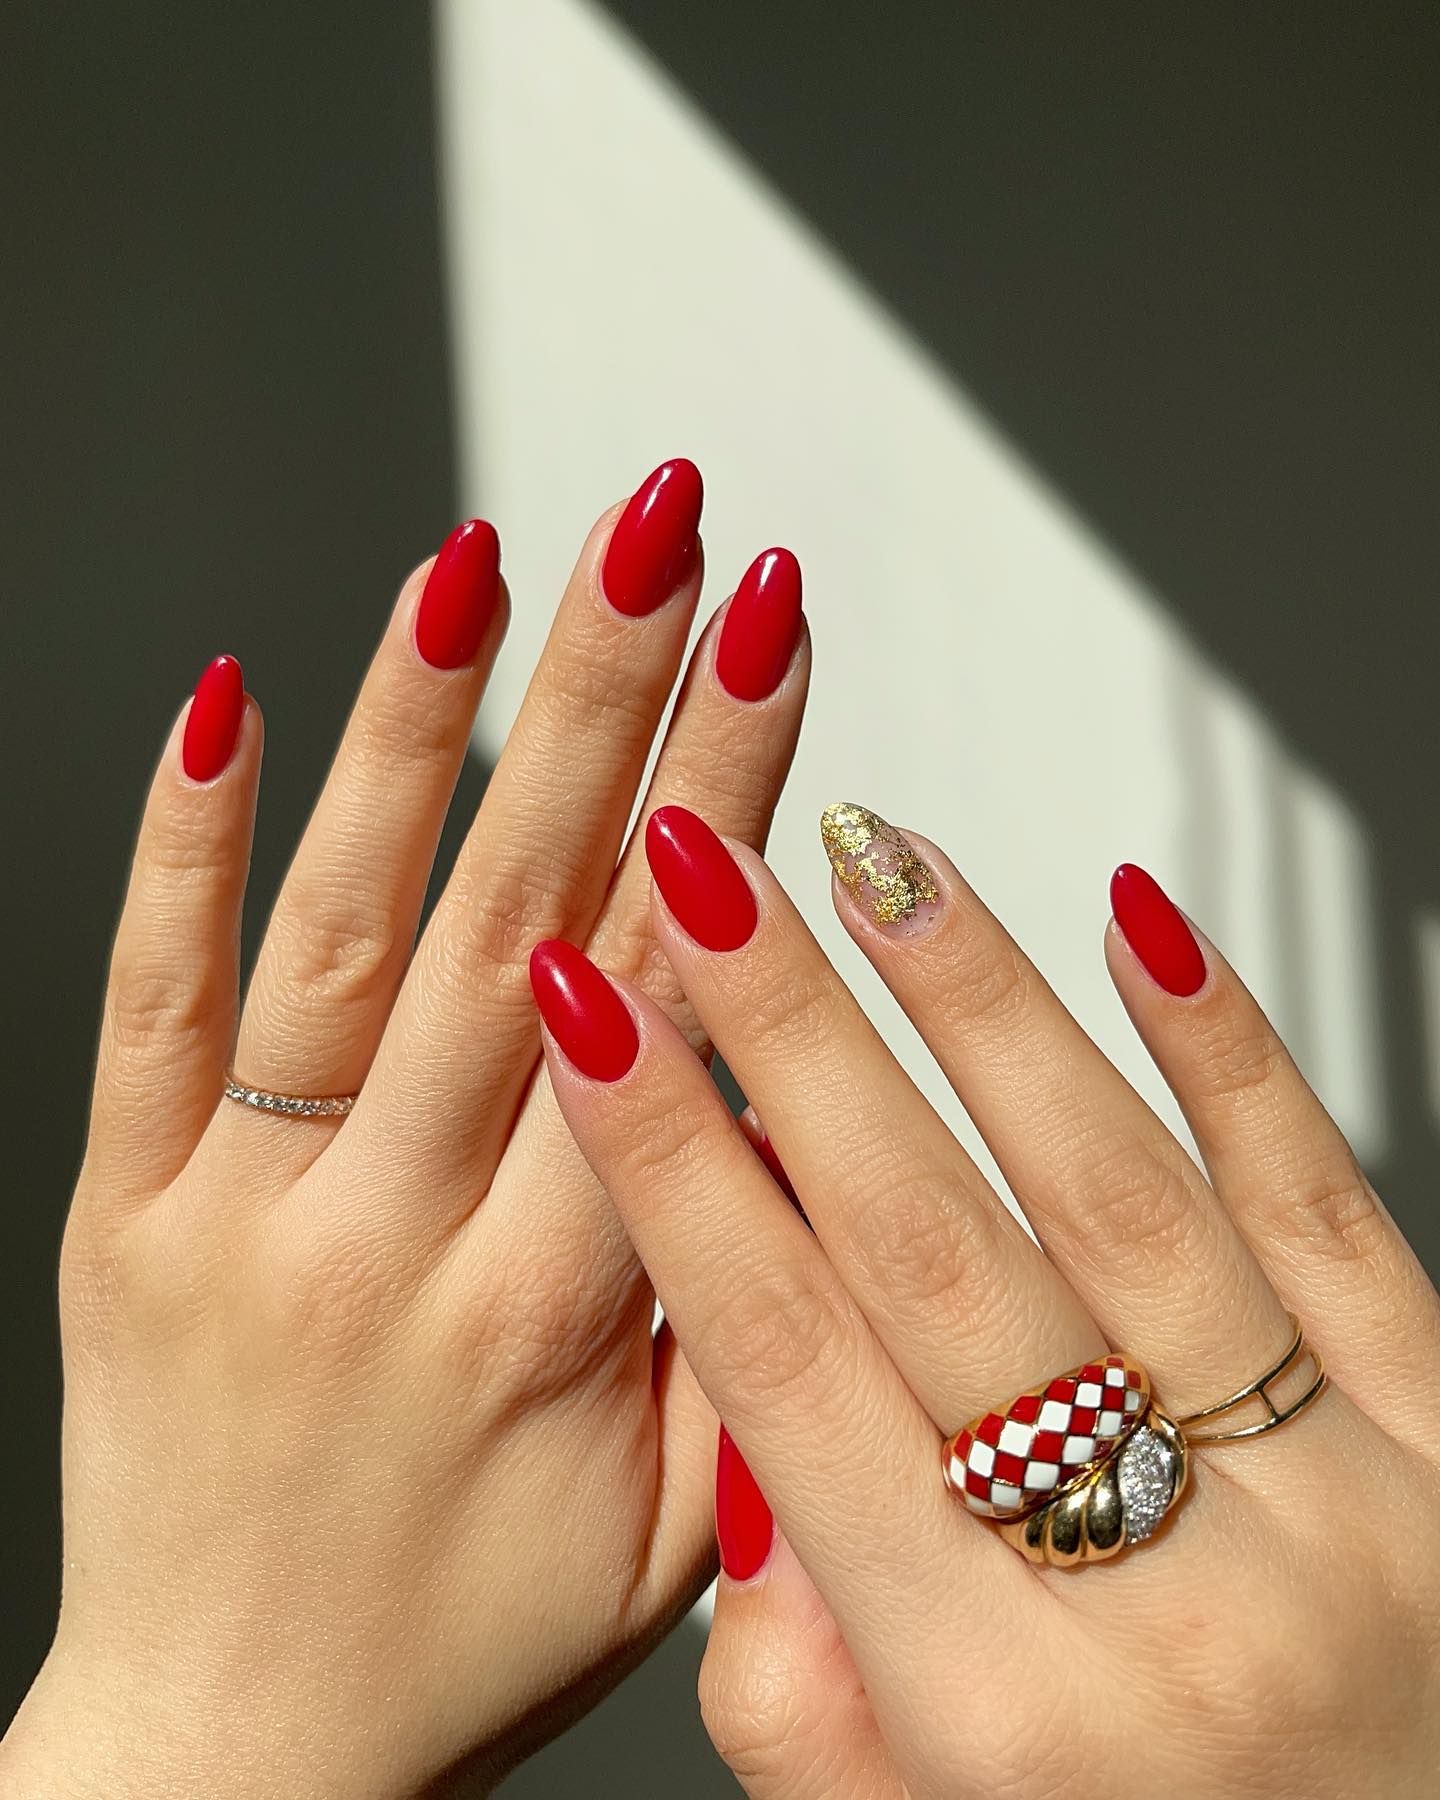 Winter & Holiday Nail Ideas You MUST try this season | Tobi Blog